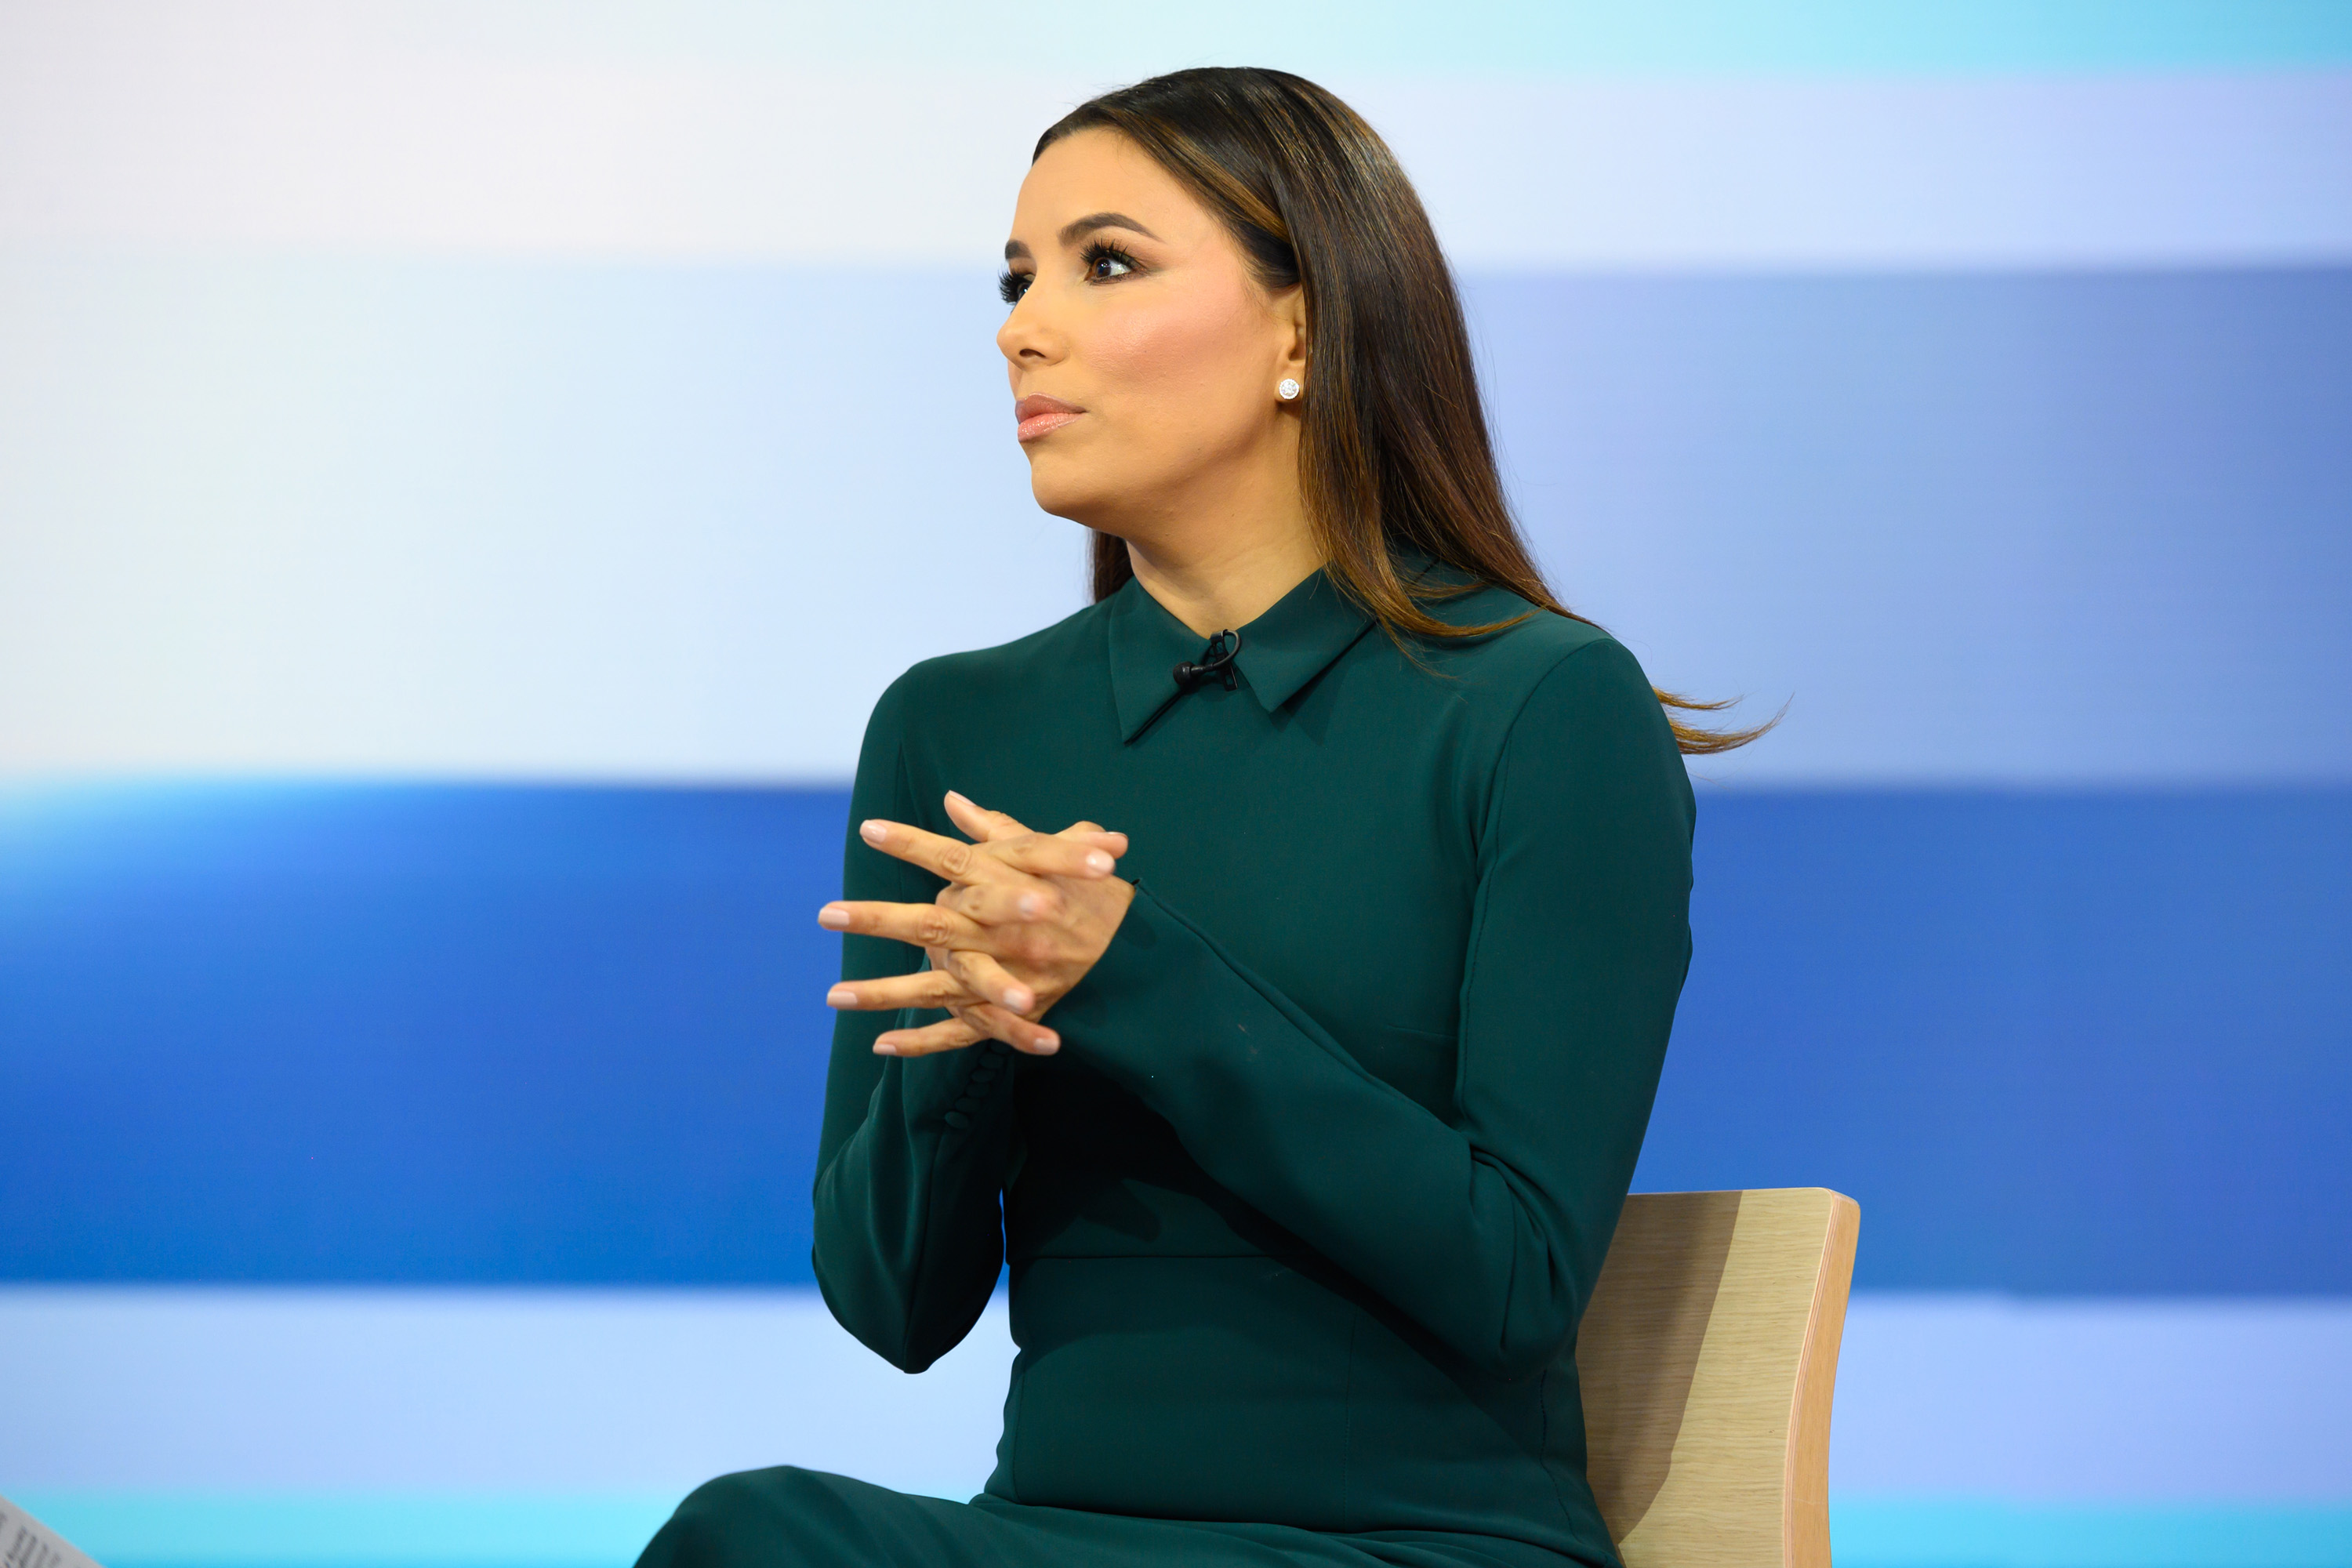 Eva Longoria on the "Today" show in 2019 | Source: Getty Images